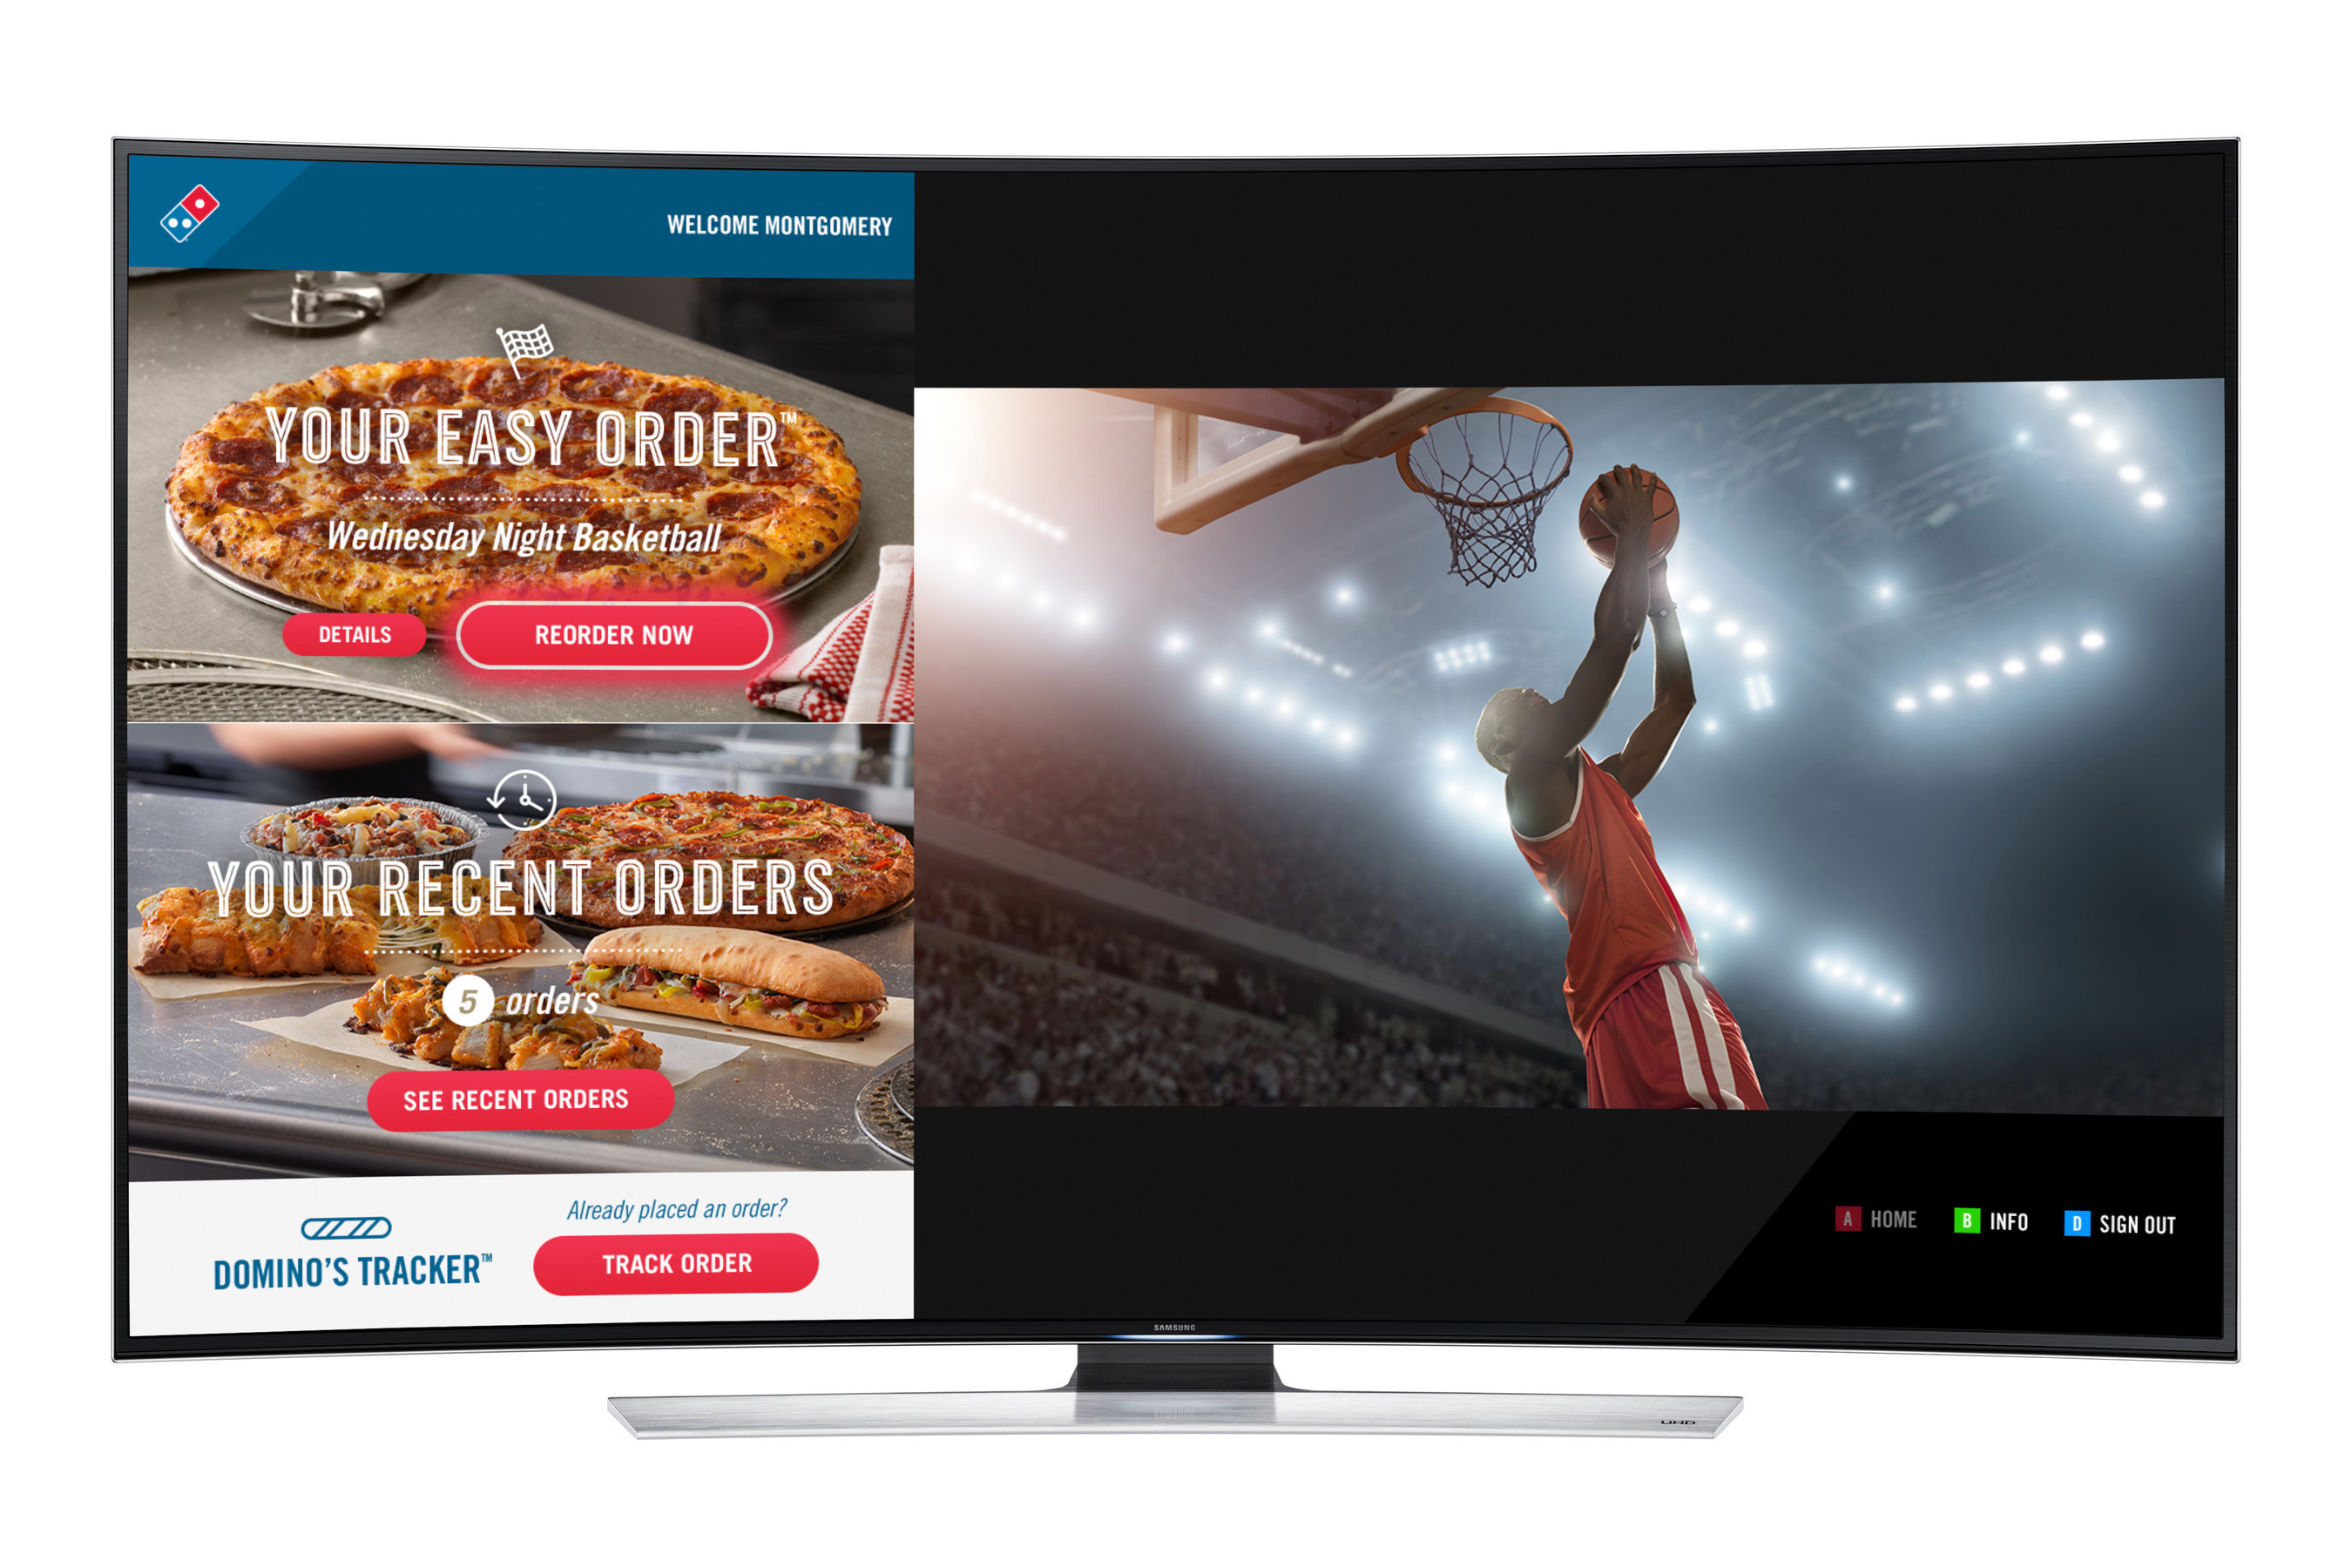 You can now order and track your pizza from Domino's through your Samsung Smart TV.